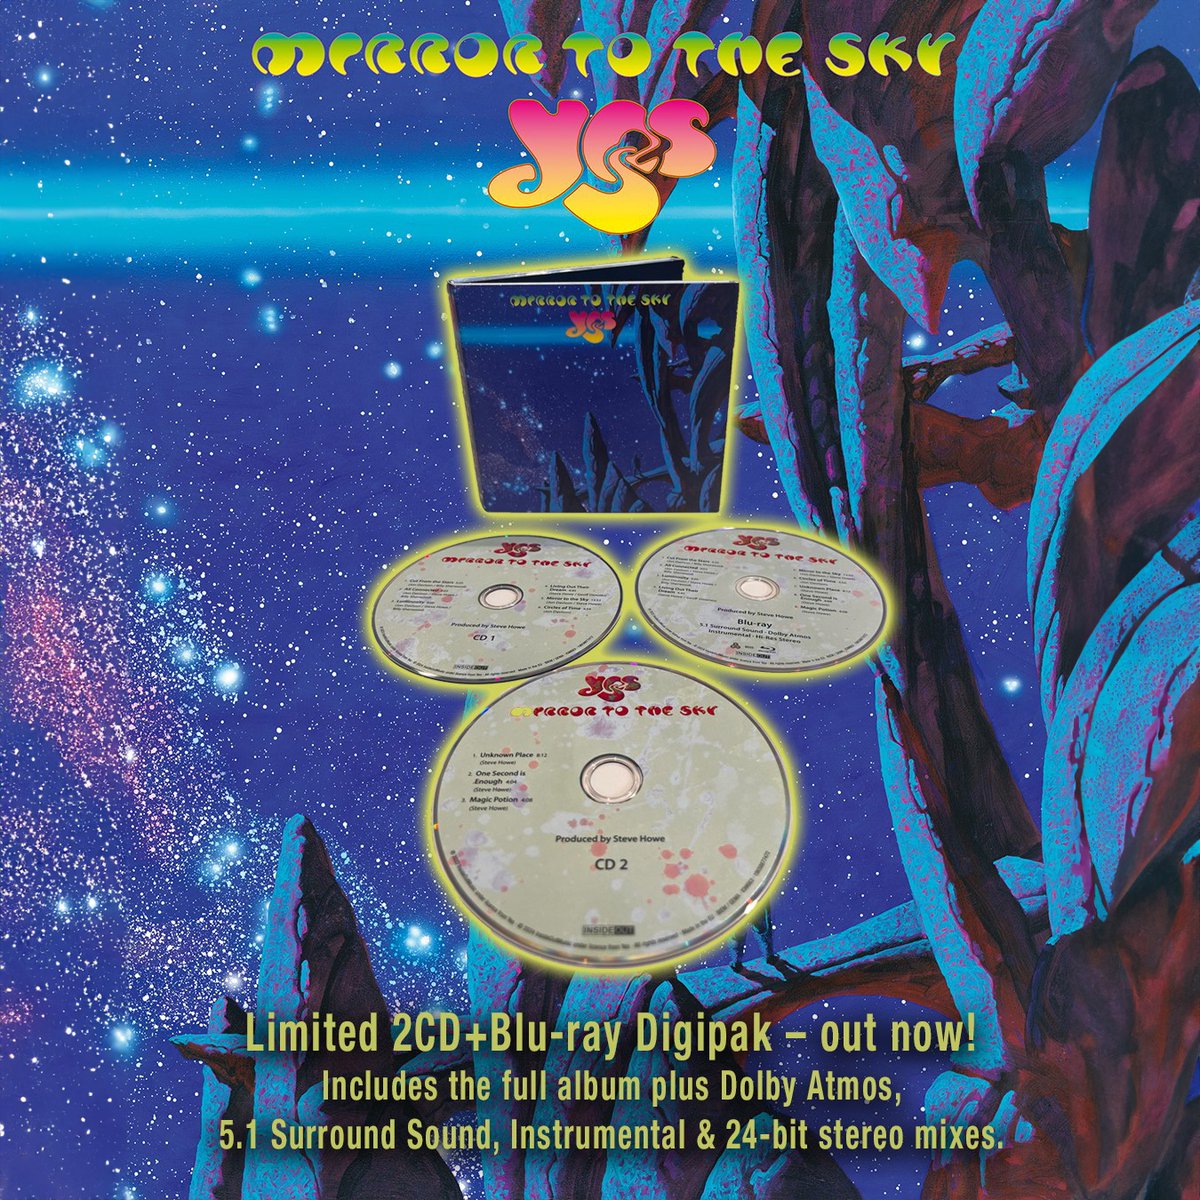 MIRROR TO THE SKY Limited Edition 2CD+Blu-ray Digipak OUT NOW! Order here: yes-band.lnk.to/MirrorToTheSky… Including the full album in Dolby Atmos, 5.1 Surround Sound, Instrumental & 24-bit Stereo mixes, and 20-page booklet!